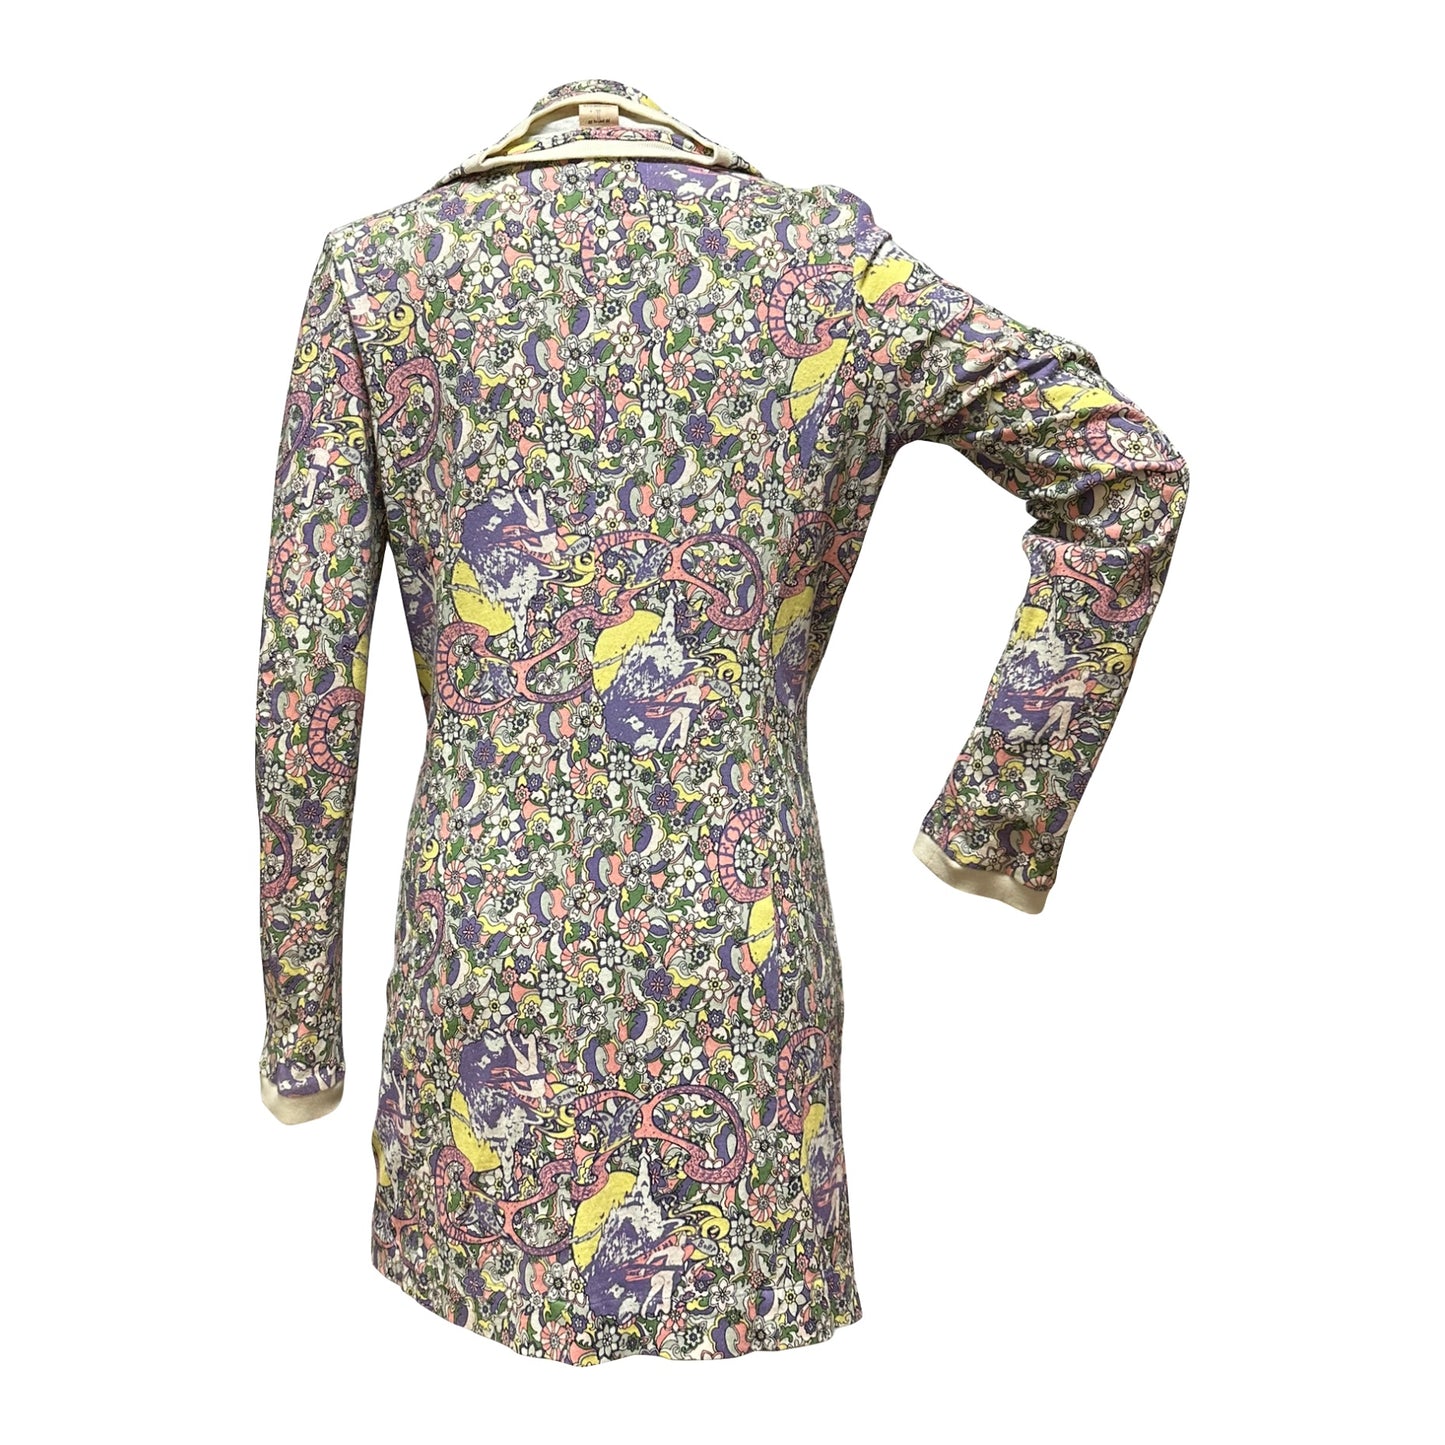 UNDERCOVER Spring Summer 2006 "T" Reconstructed Psychedelic Print T-Shirt Coat